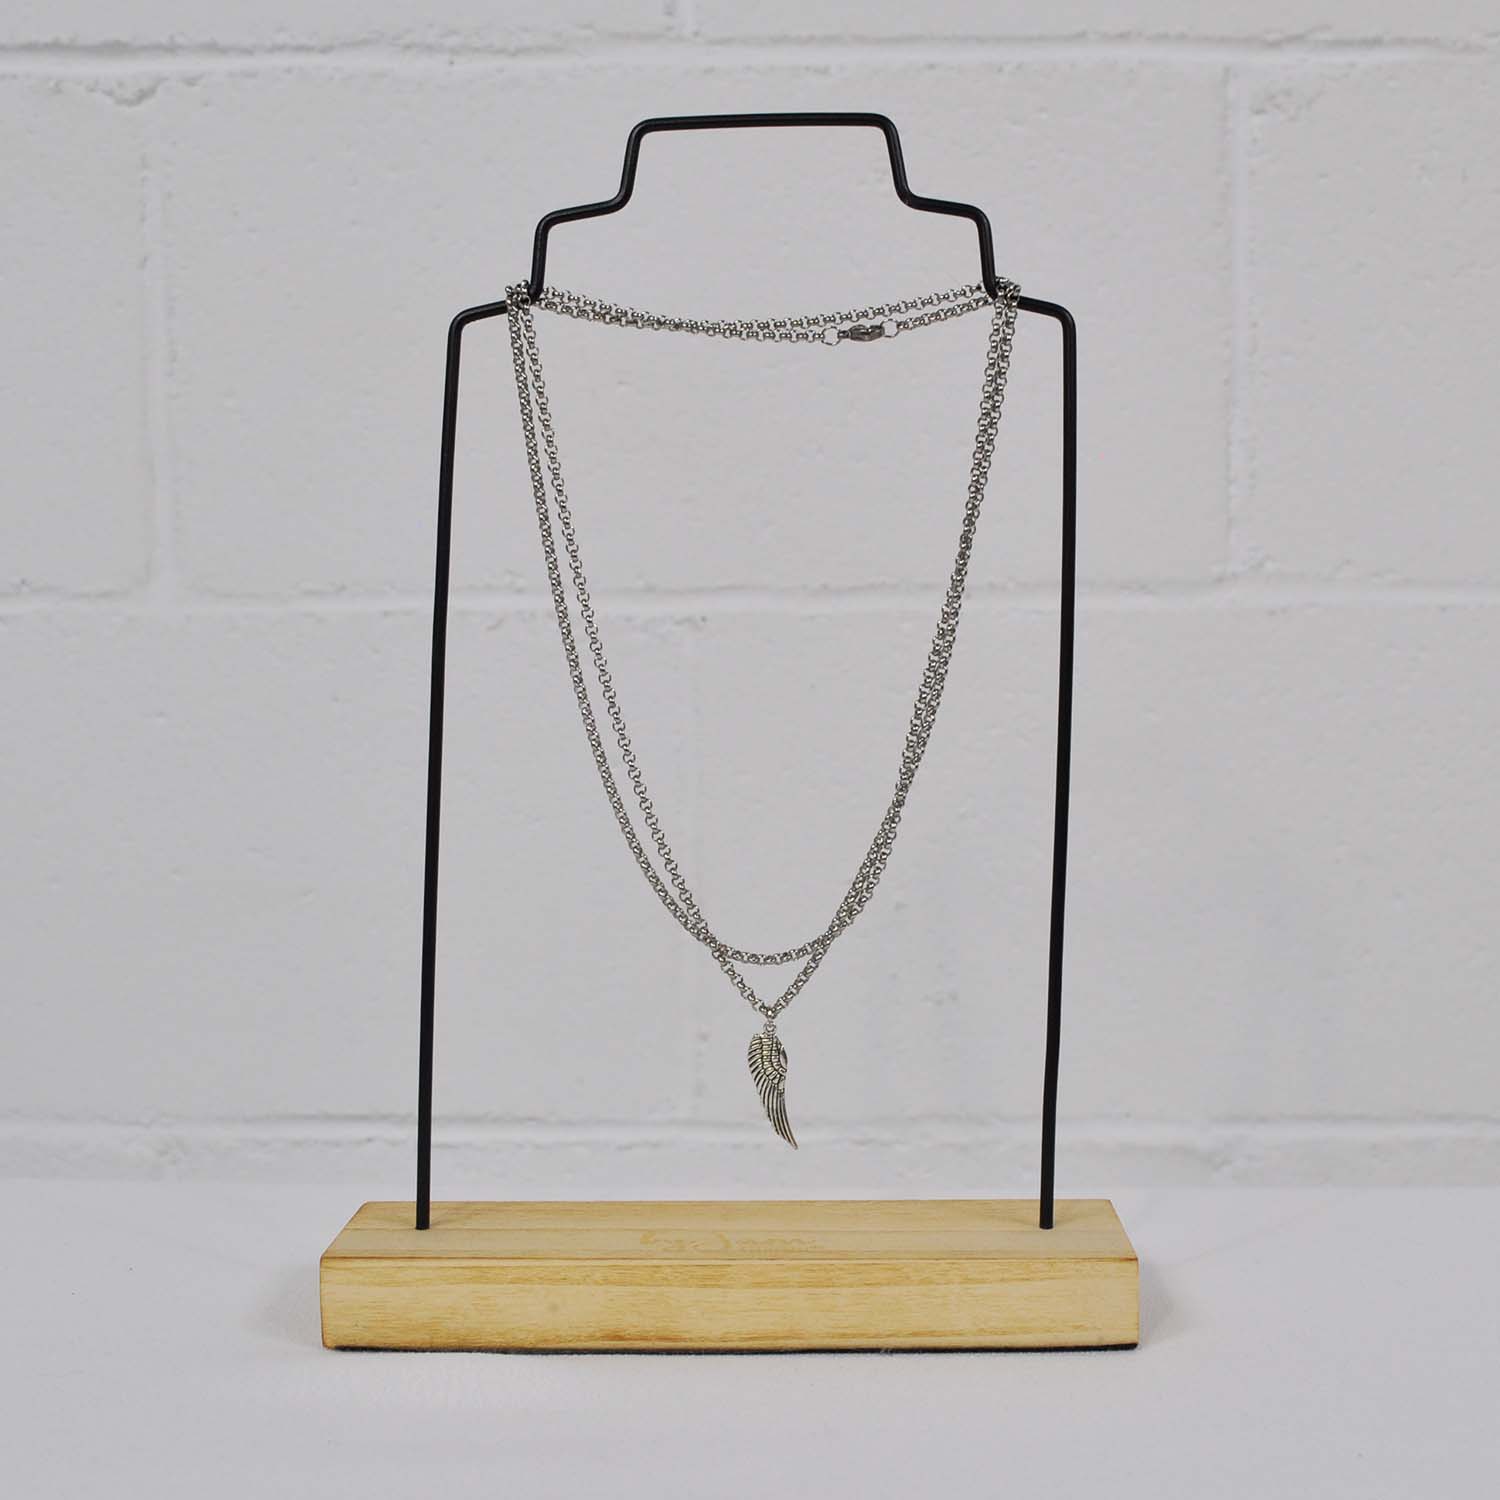 Long wing necklace
